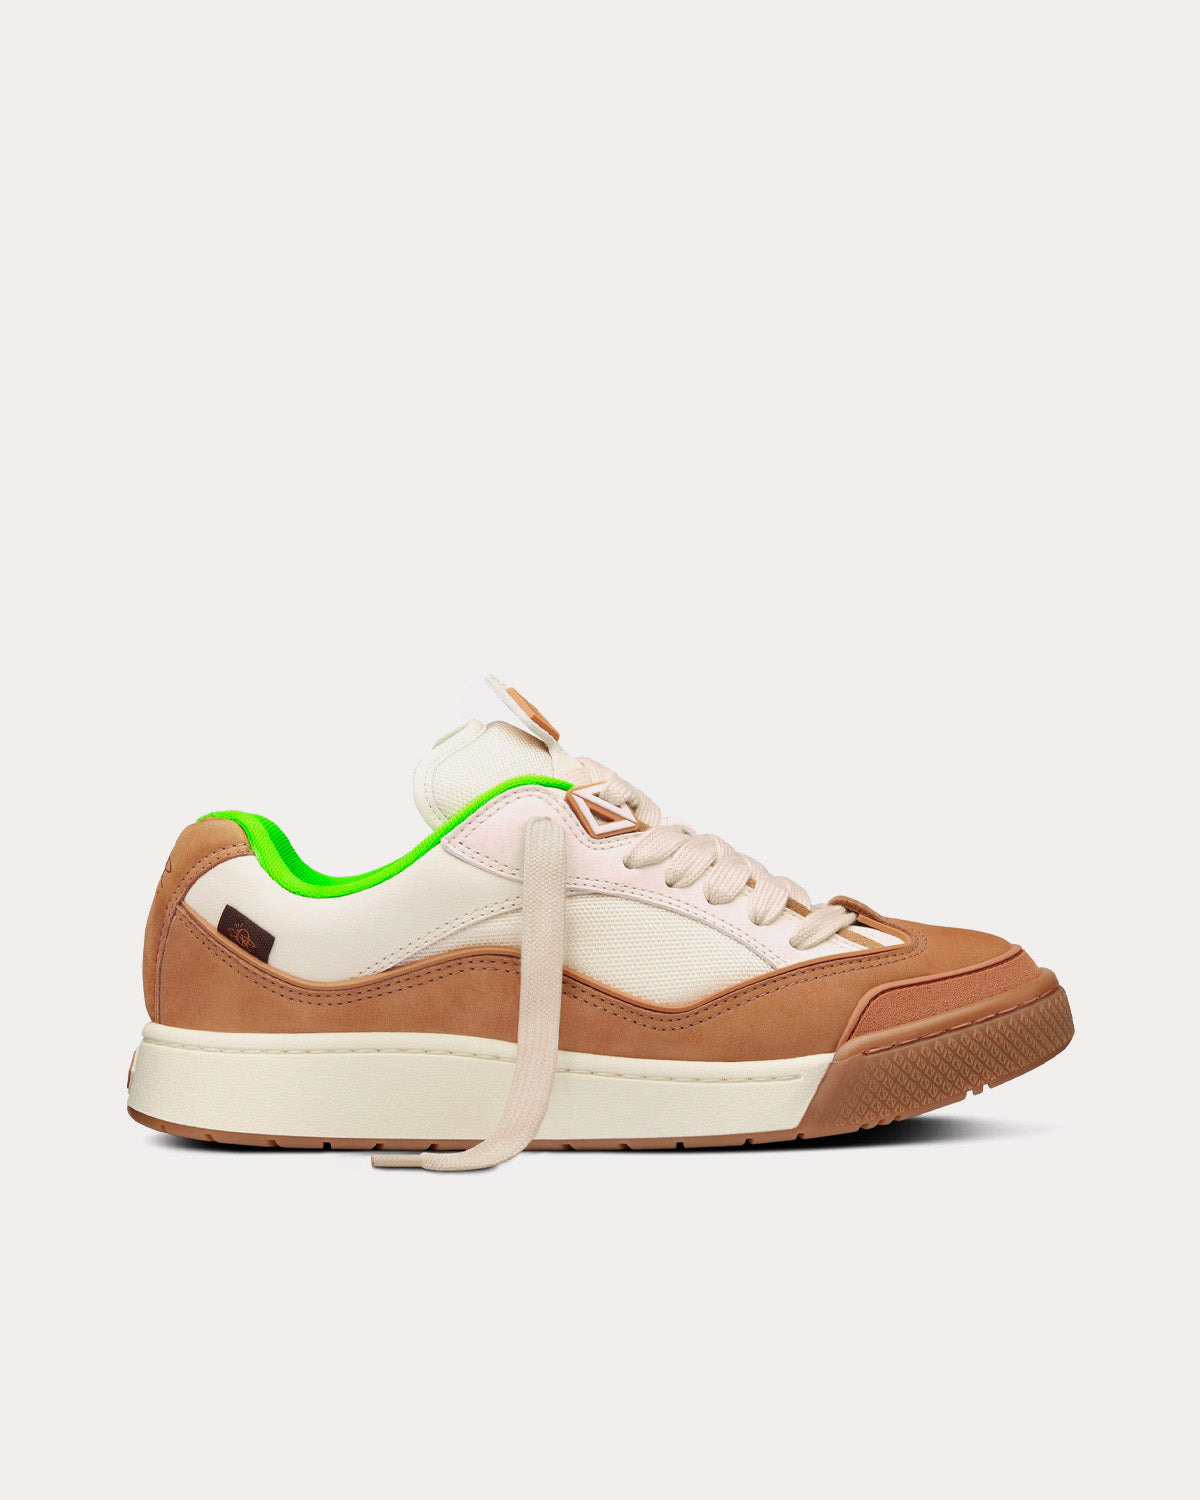 B713 'Cactus Jack' Cream Grained Calfskin and Technical Mesh with Coffee  Nubuck Calfskin Low Top Sneakers